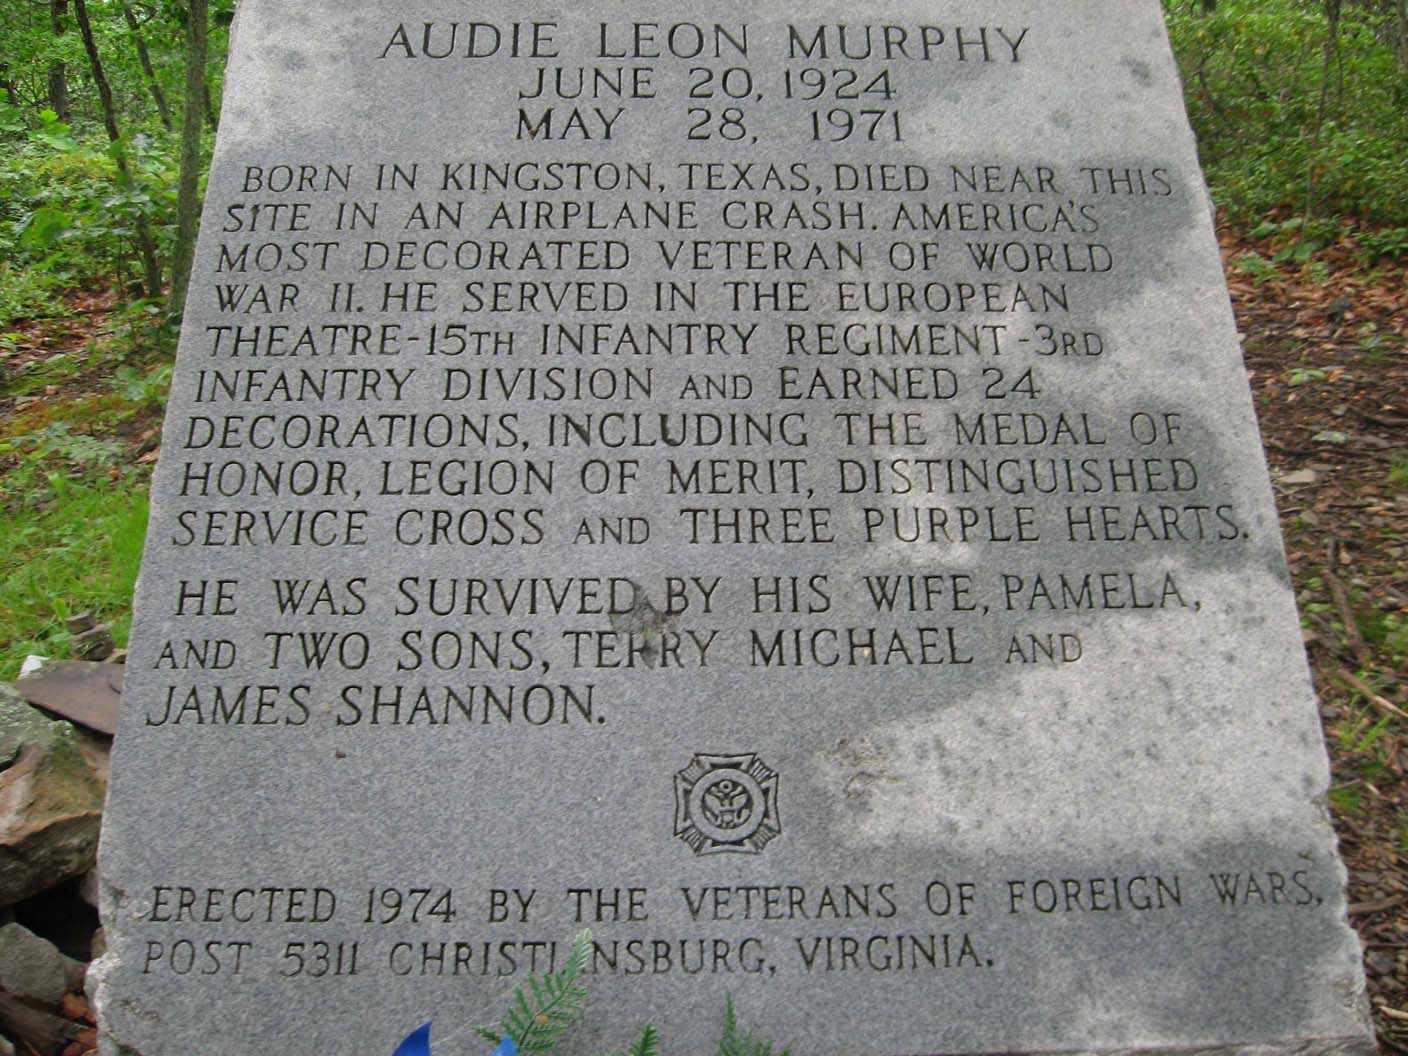 The Audie Murphy Monument. This WWII Veteran died in a plane crash off the AT.